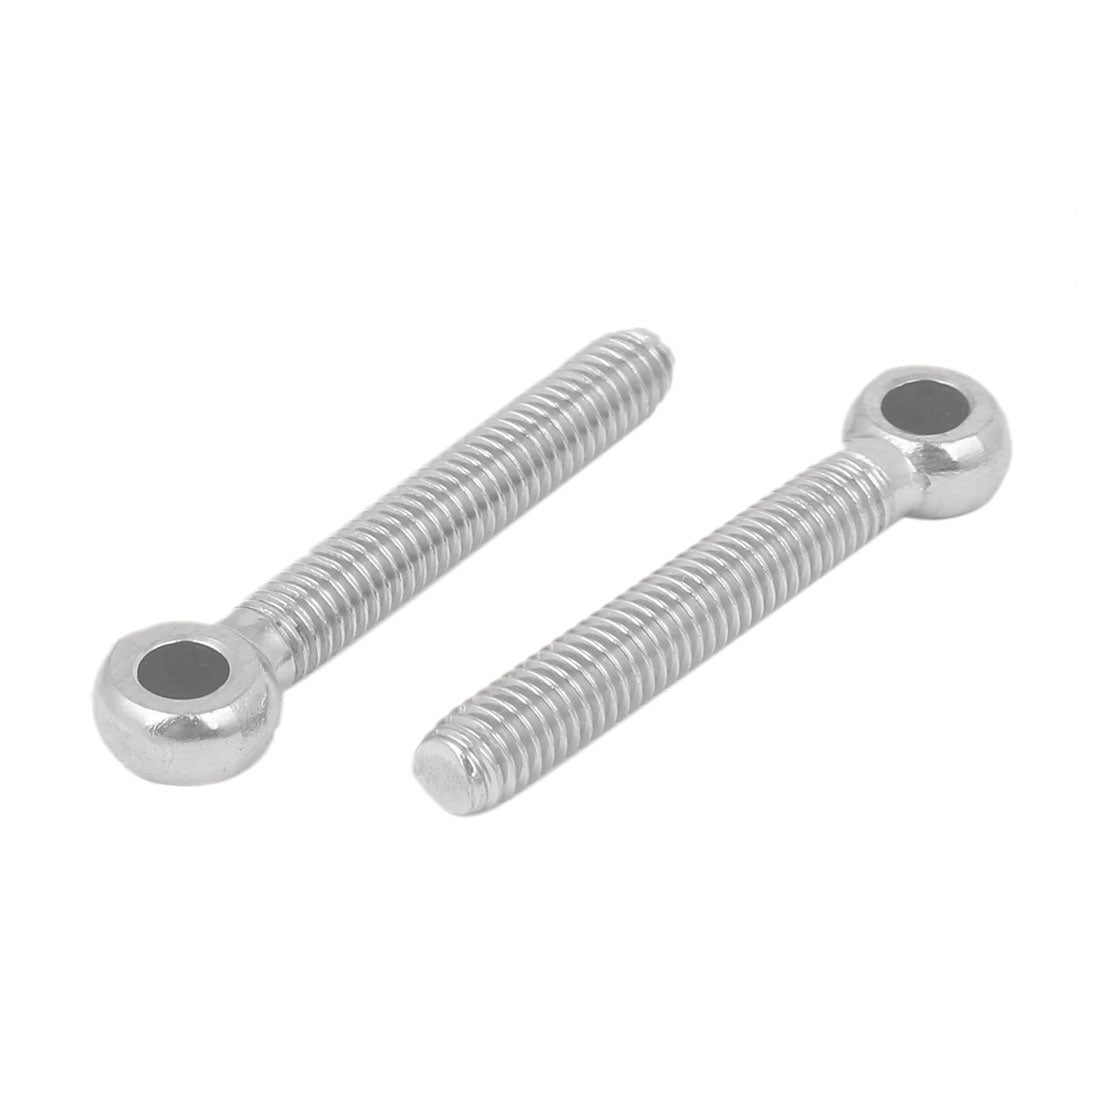 uxcell Uxcell M6 x 40mm 304 Stainless Steel Machine Shoulder Lift Eye Bolt Rigging 12pcs